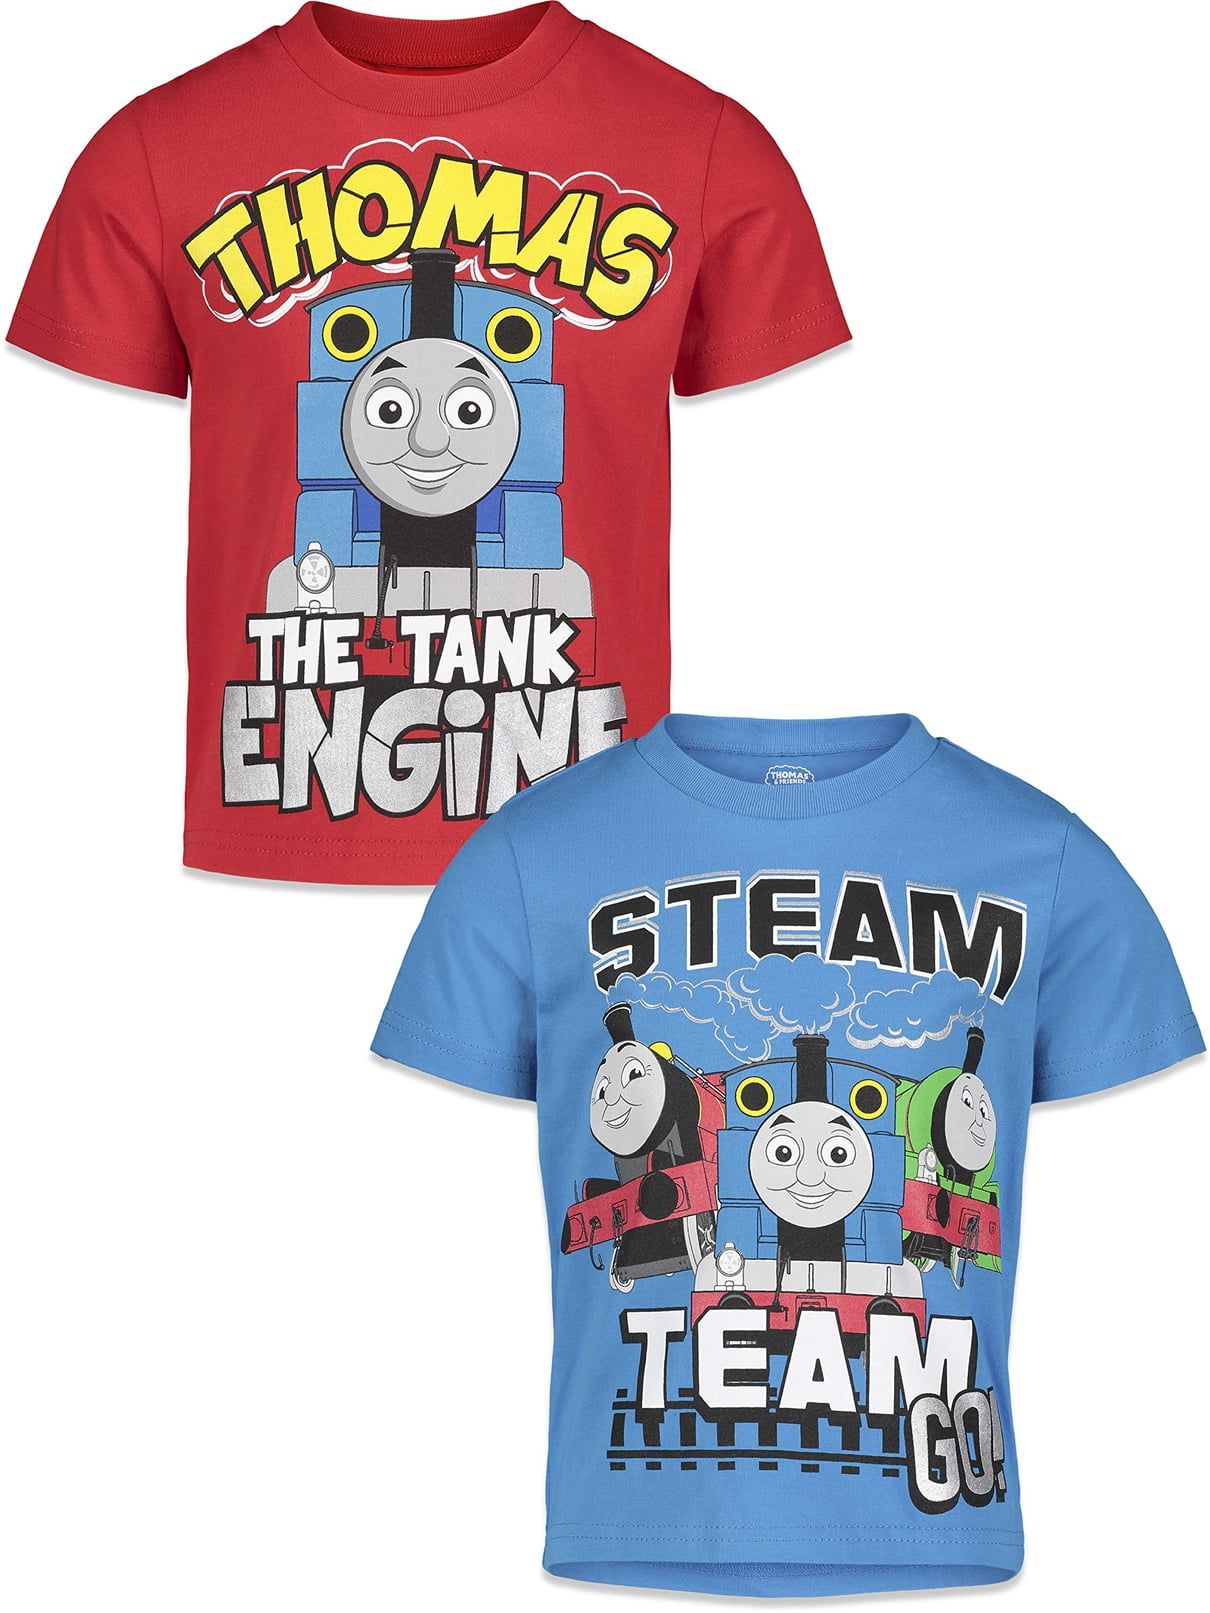 Thomas & Friends Toddler Boys S/S Navy Character Print Top Size 2T 3T 4T 